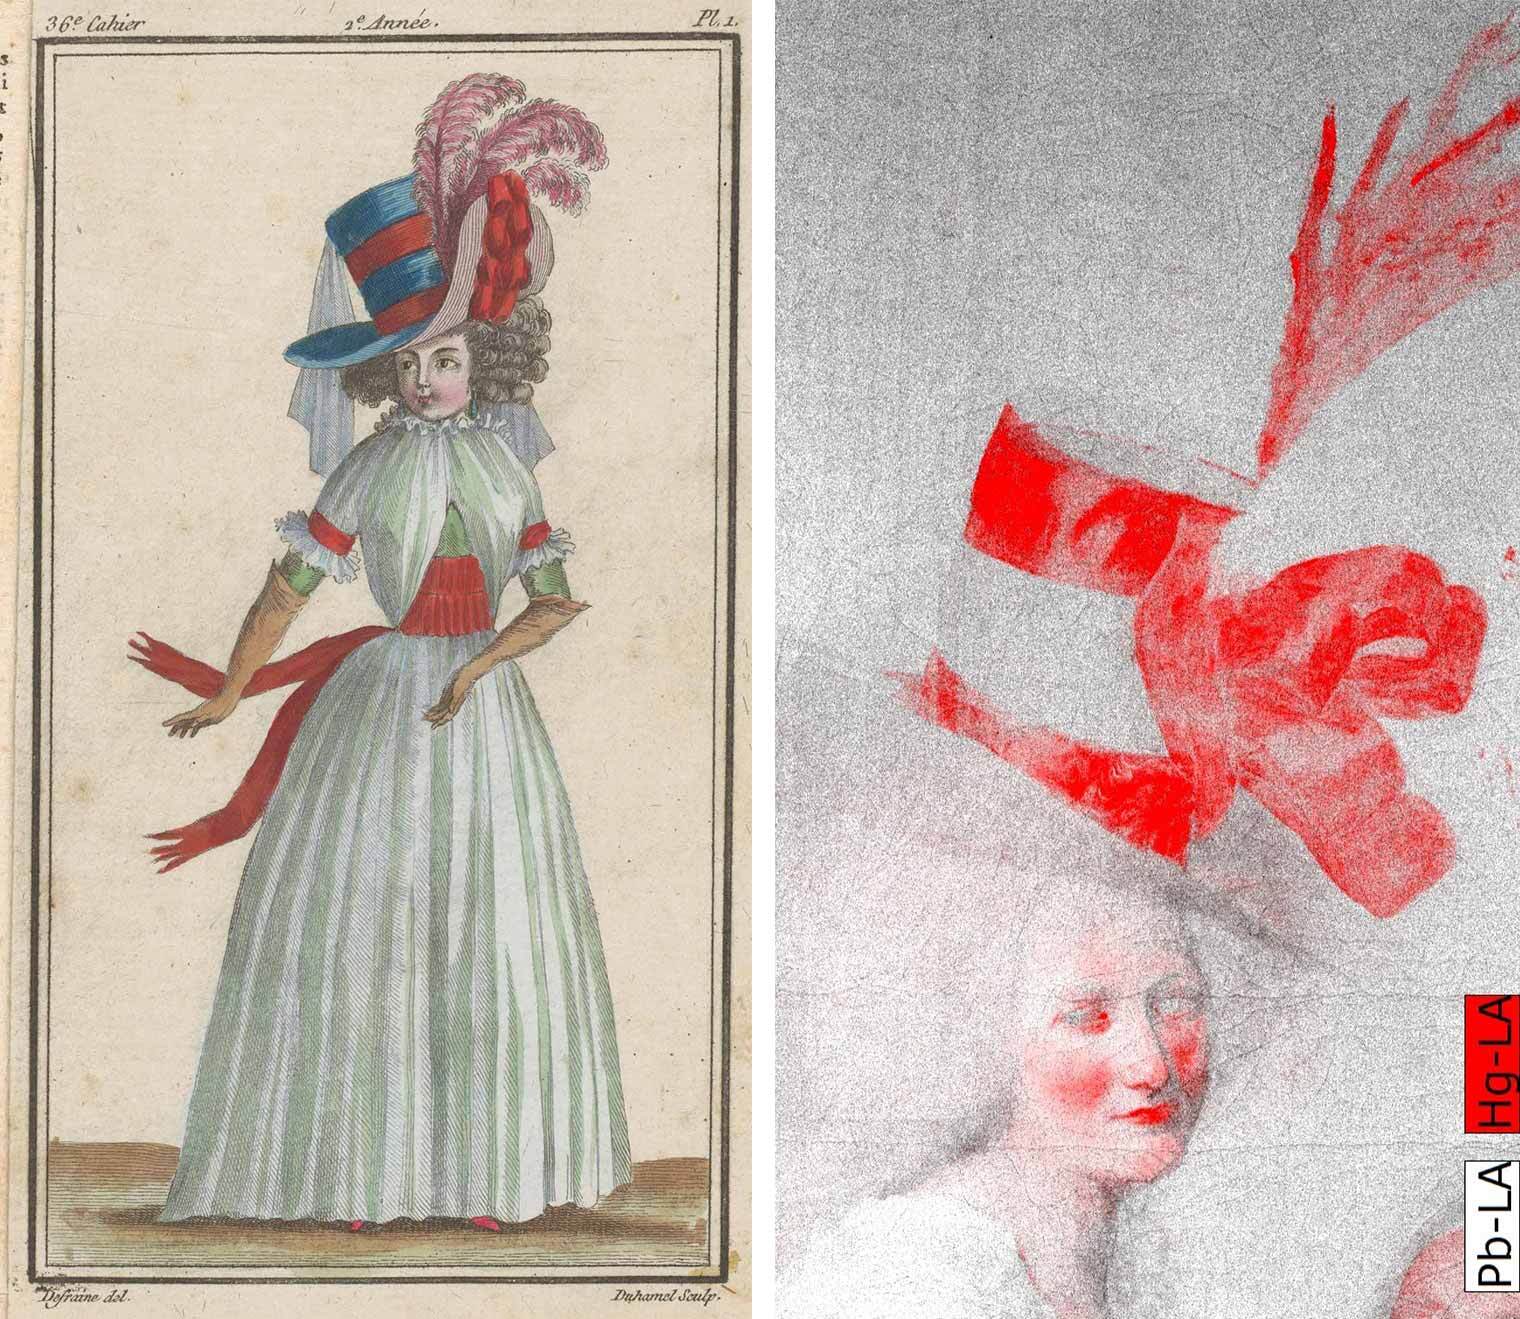 Drawing of a woman with a hat beside a white red ray image of a woman with a similar hat